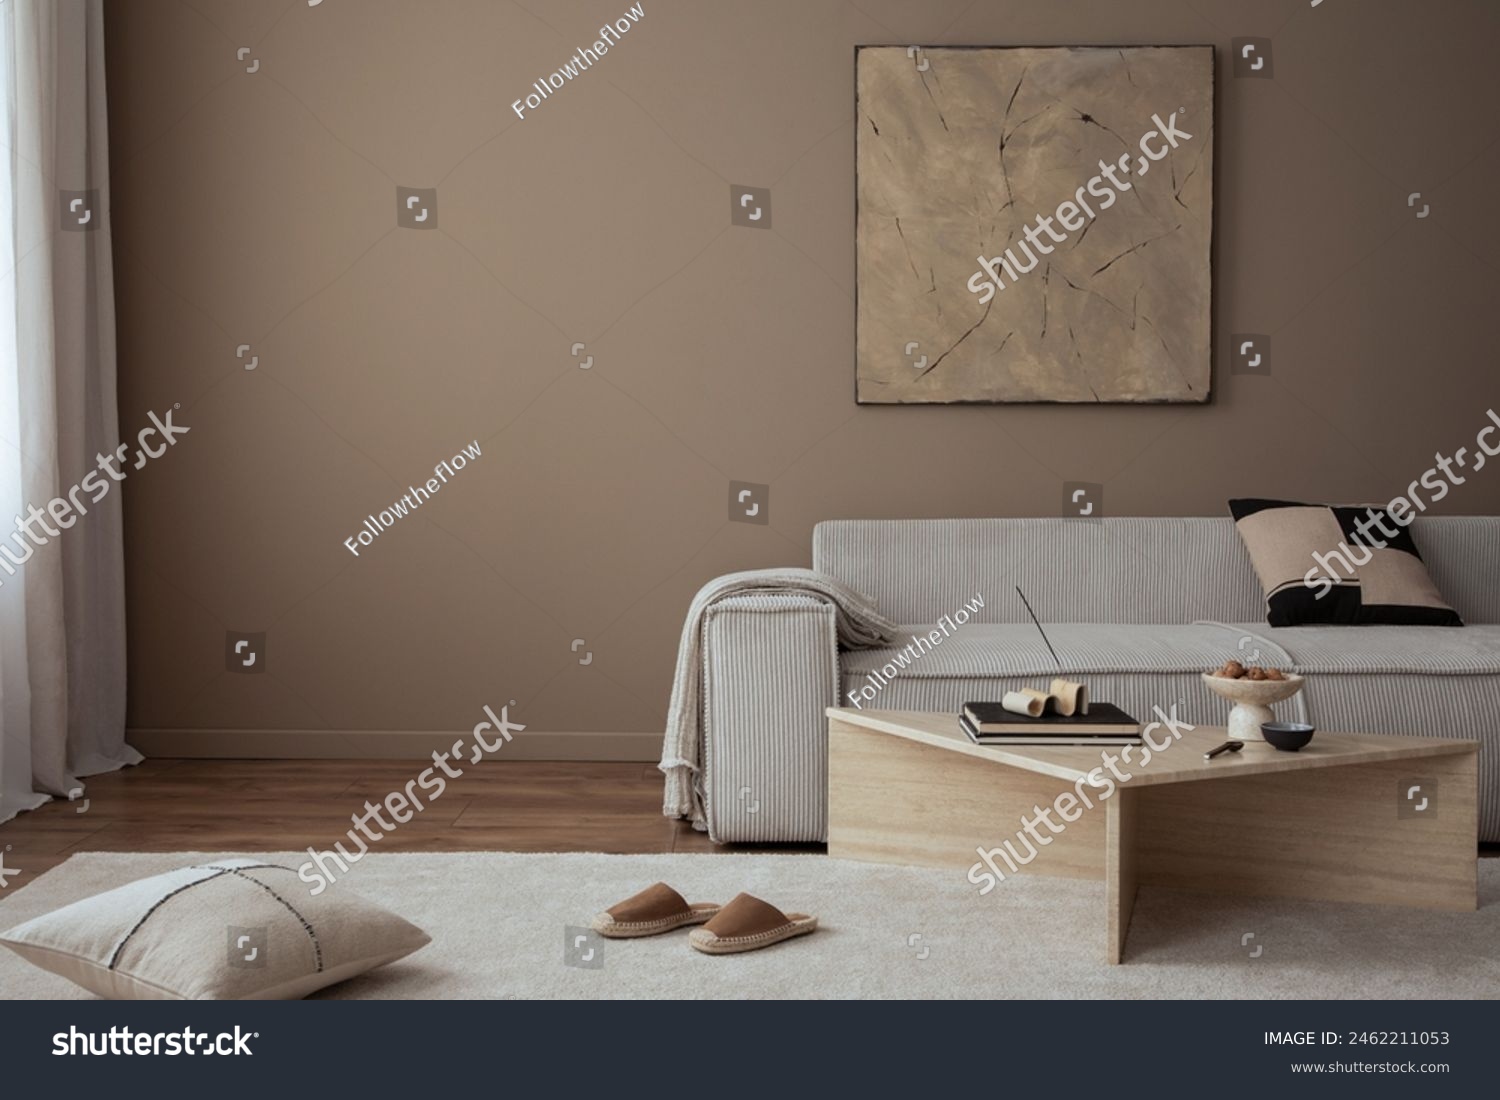 Warm and cozy living room interior with mock up poster frame, painting, beige sofa, travertine coffee table, slippers, bowl with nuts, plaid, pillow and personal accessories. Home decor. Template.